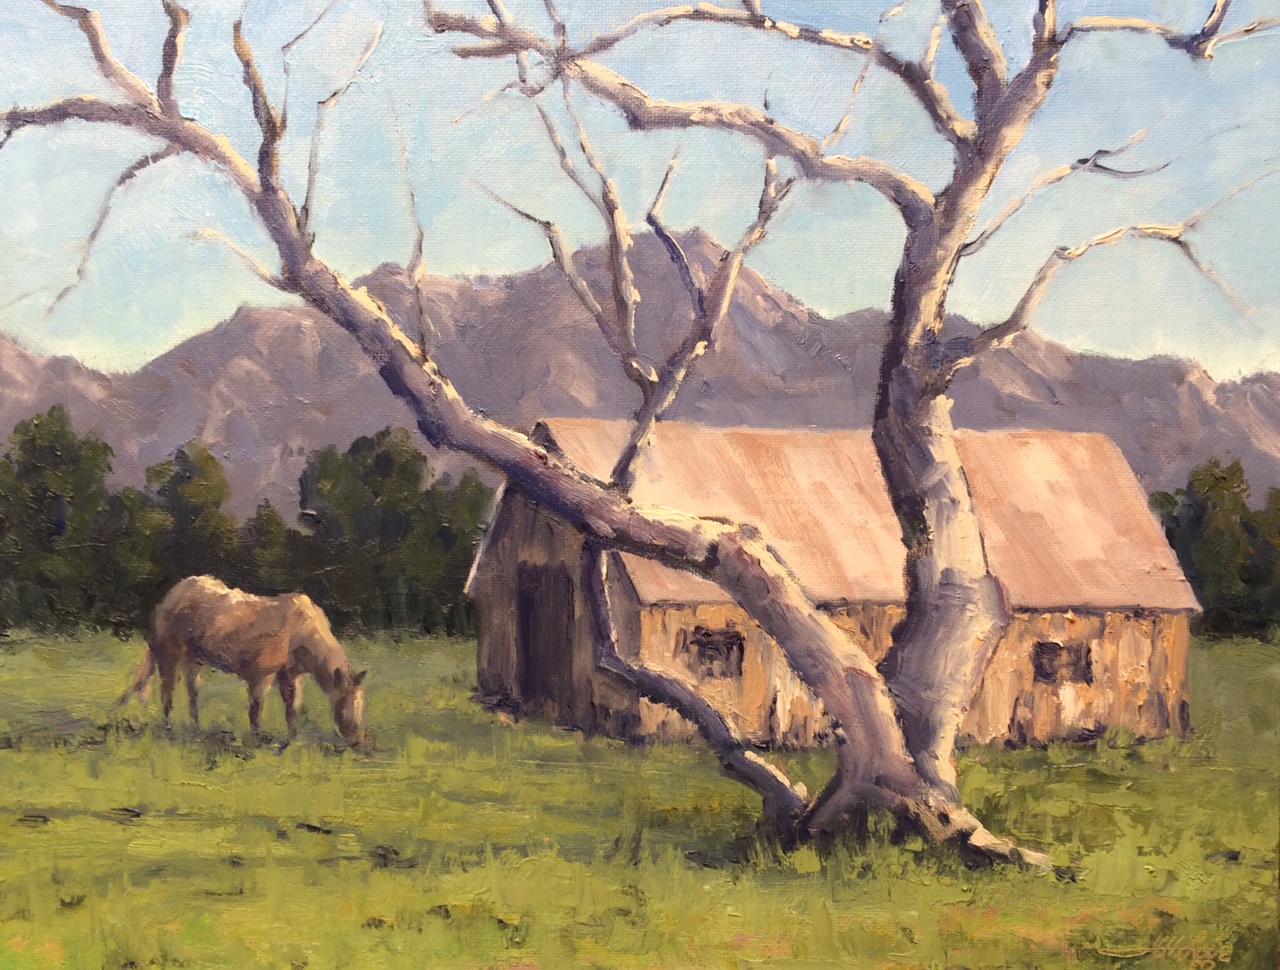 Oil Painting: "At Home On The Range" 9x12" Oil Painting On Canvas